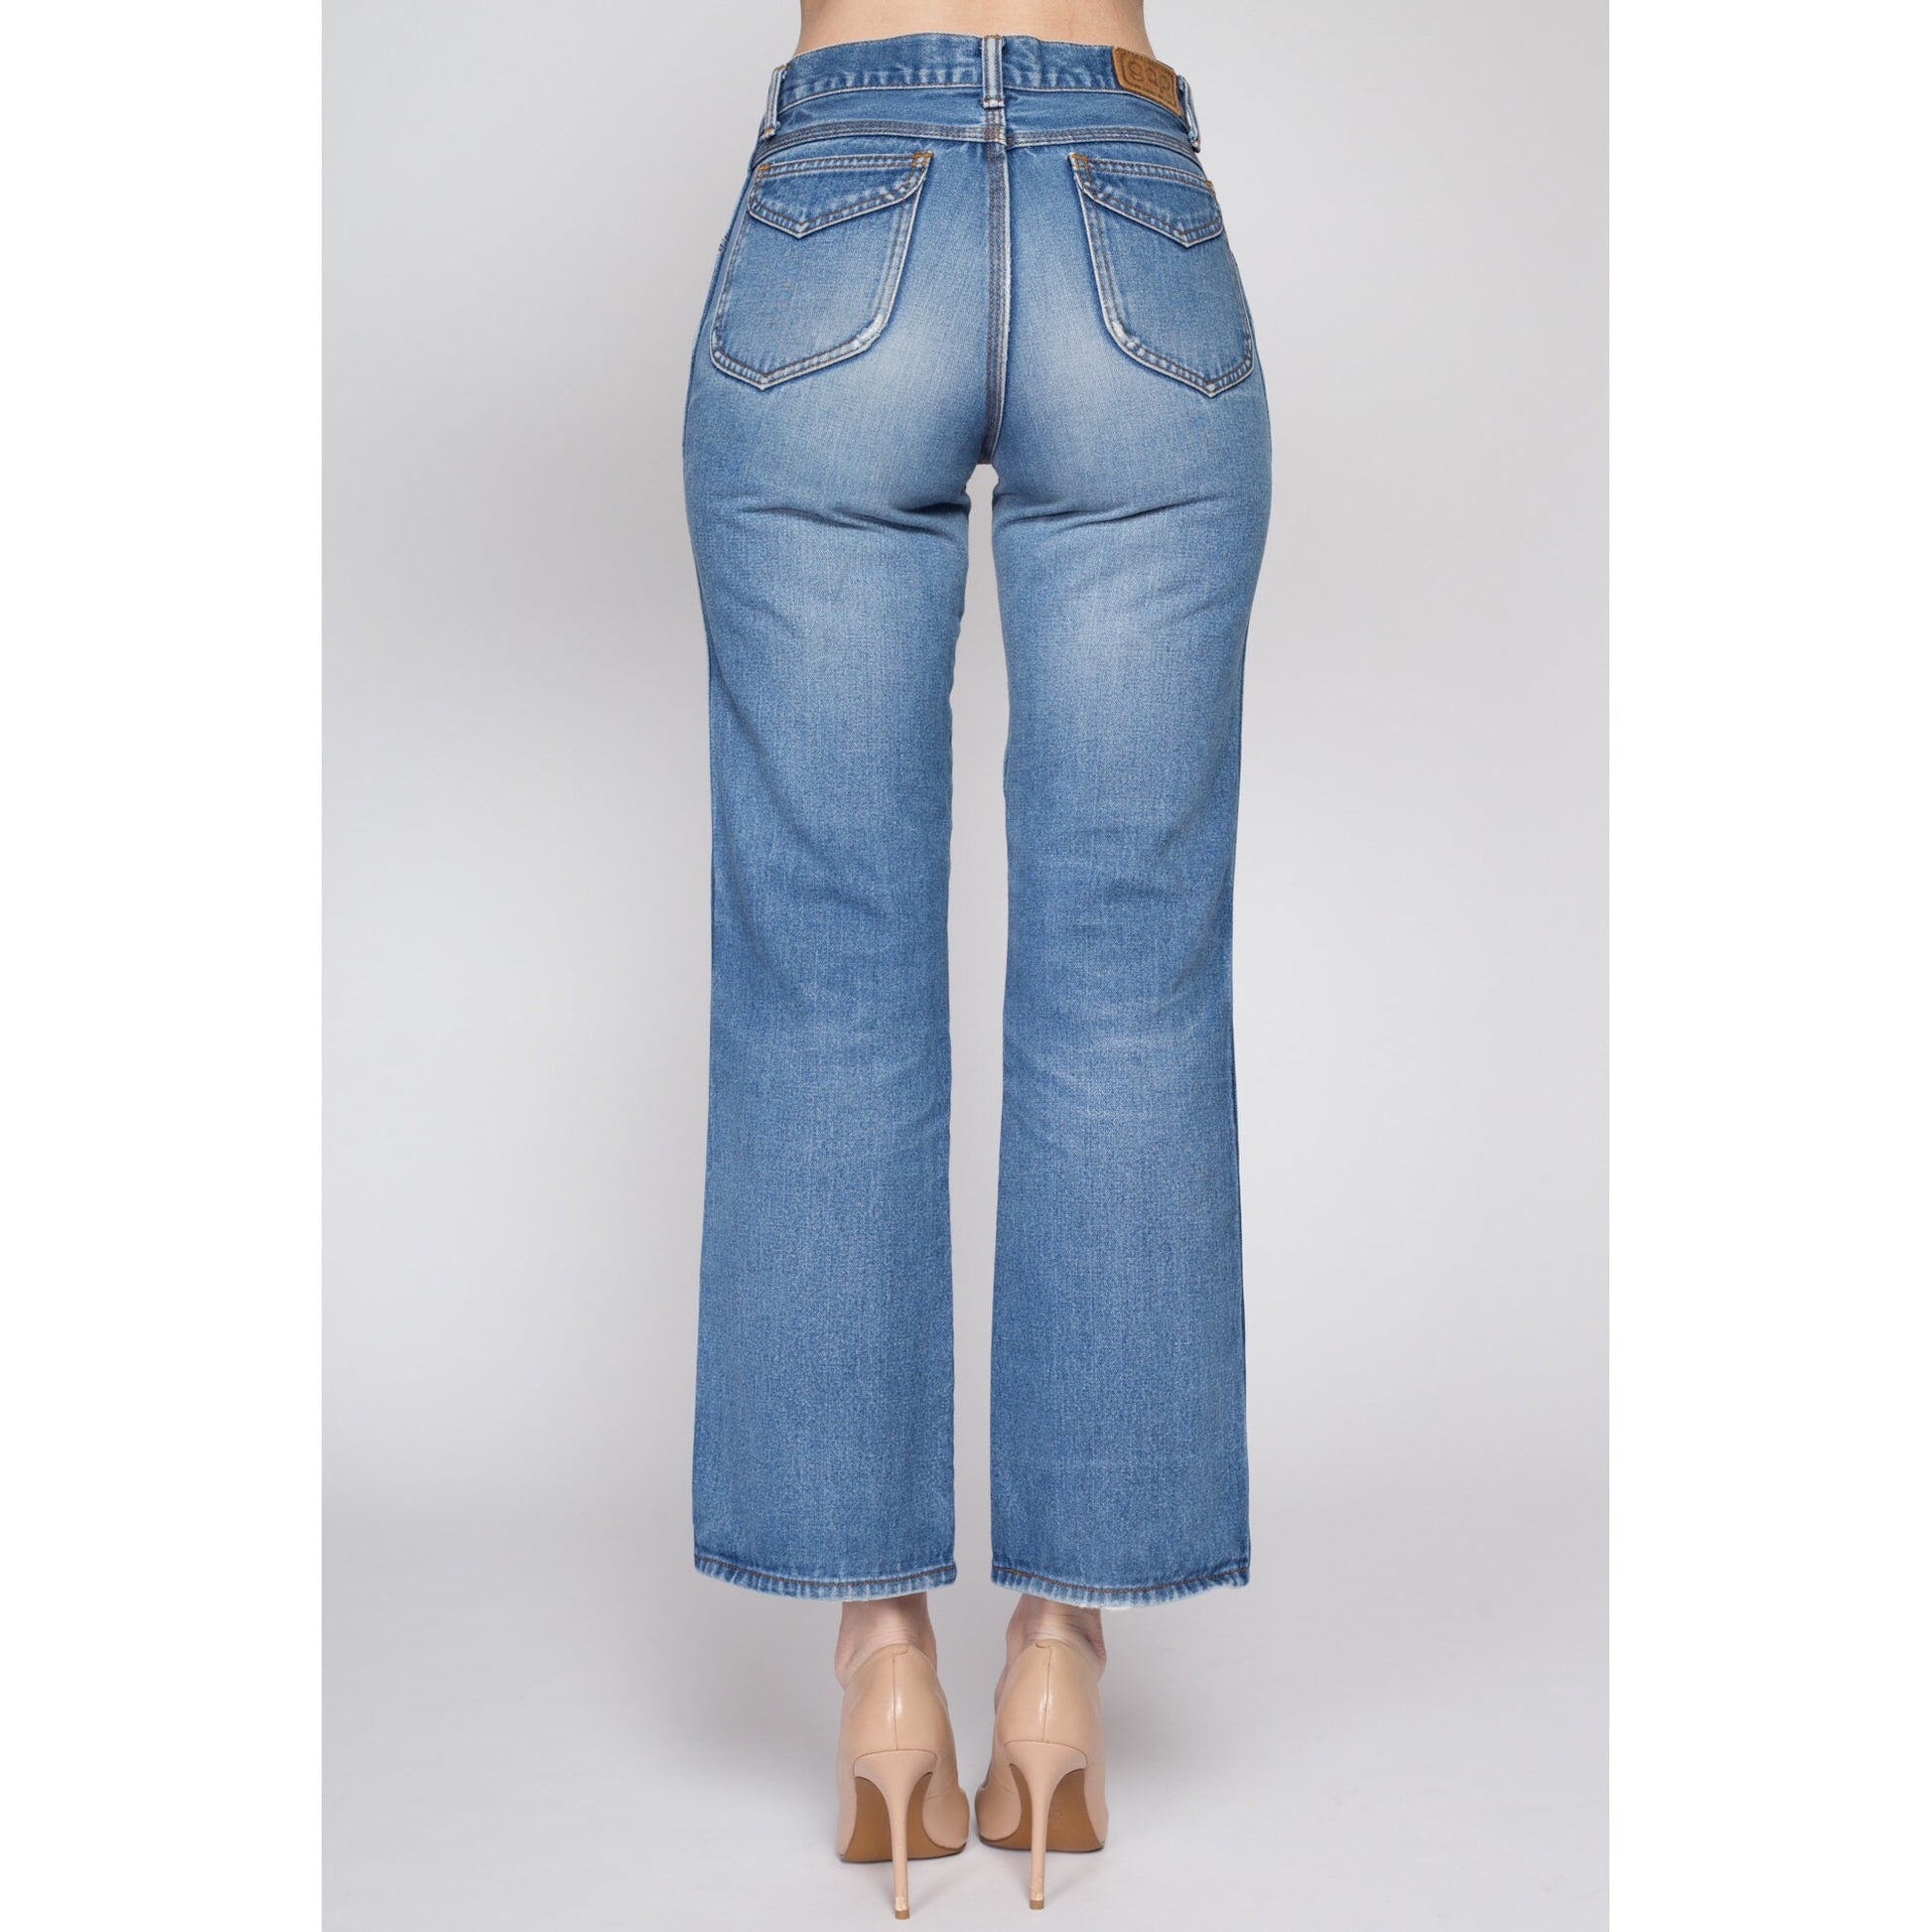 Modern BLUE BELL BOTTOM PANTS FOR WOMEN, Size: Free Size at Rs 249